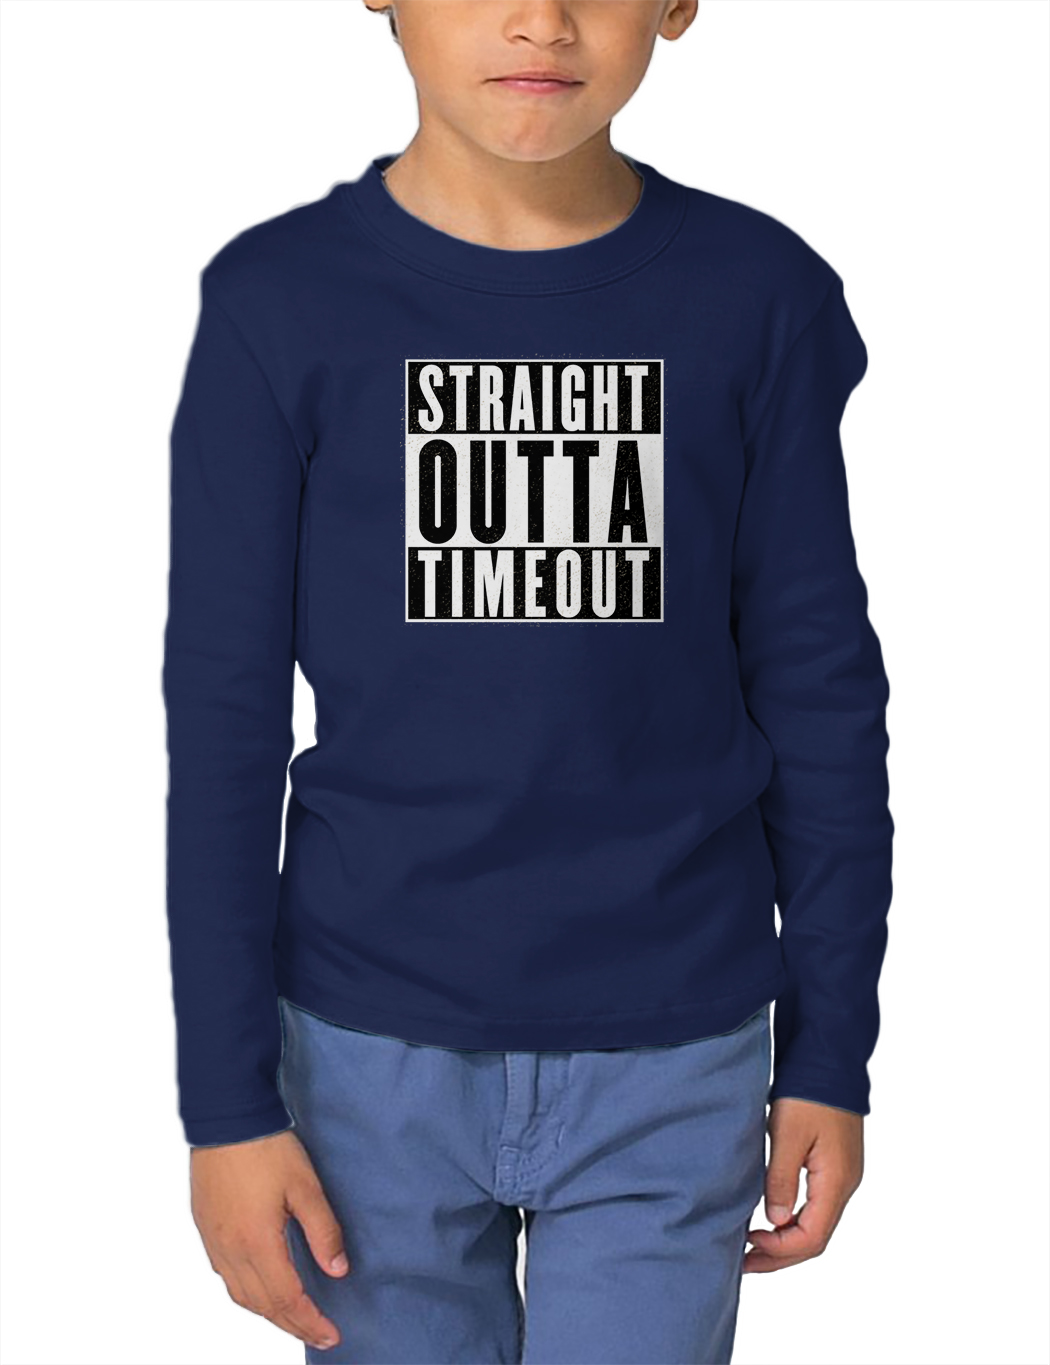 Details about   Straight Outta Timeout Trouble Maker Bad Naughty LS_CHILDTEE 